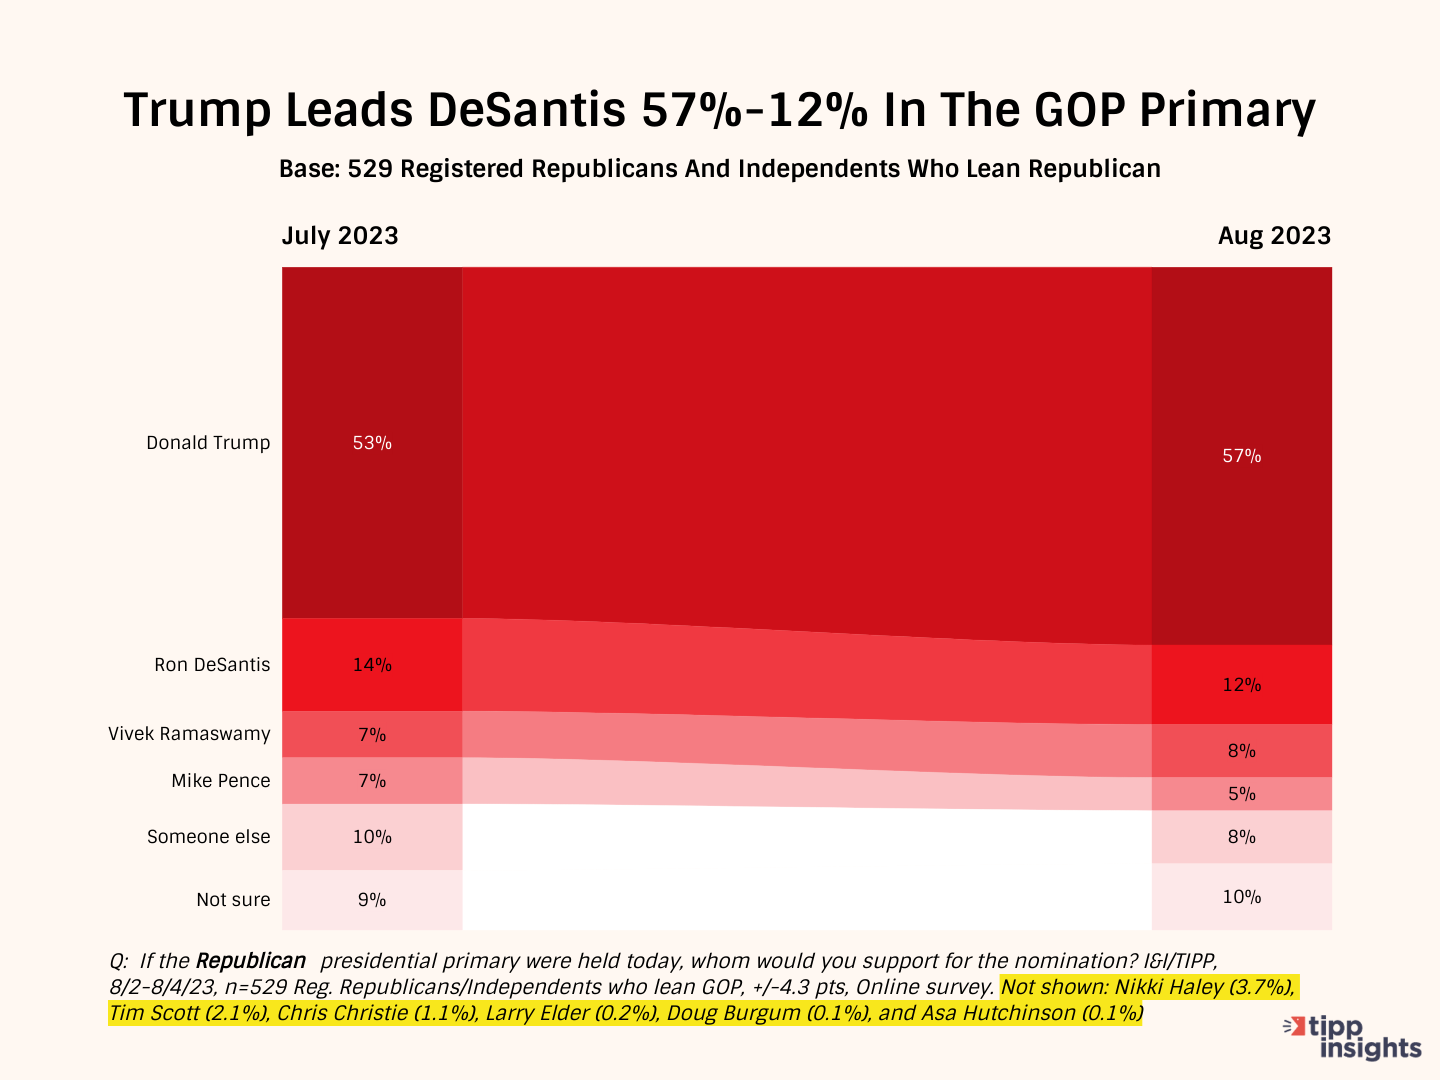 Trump leads DeSantis 57%-12% in the TIPP Poll conducted in early August